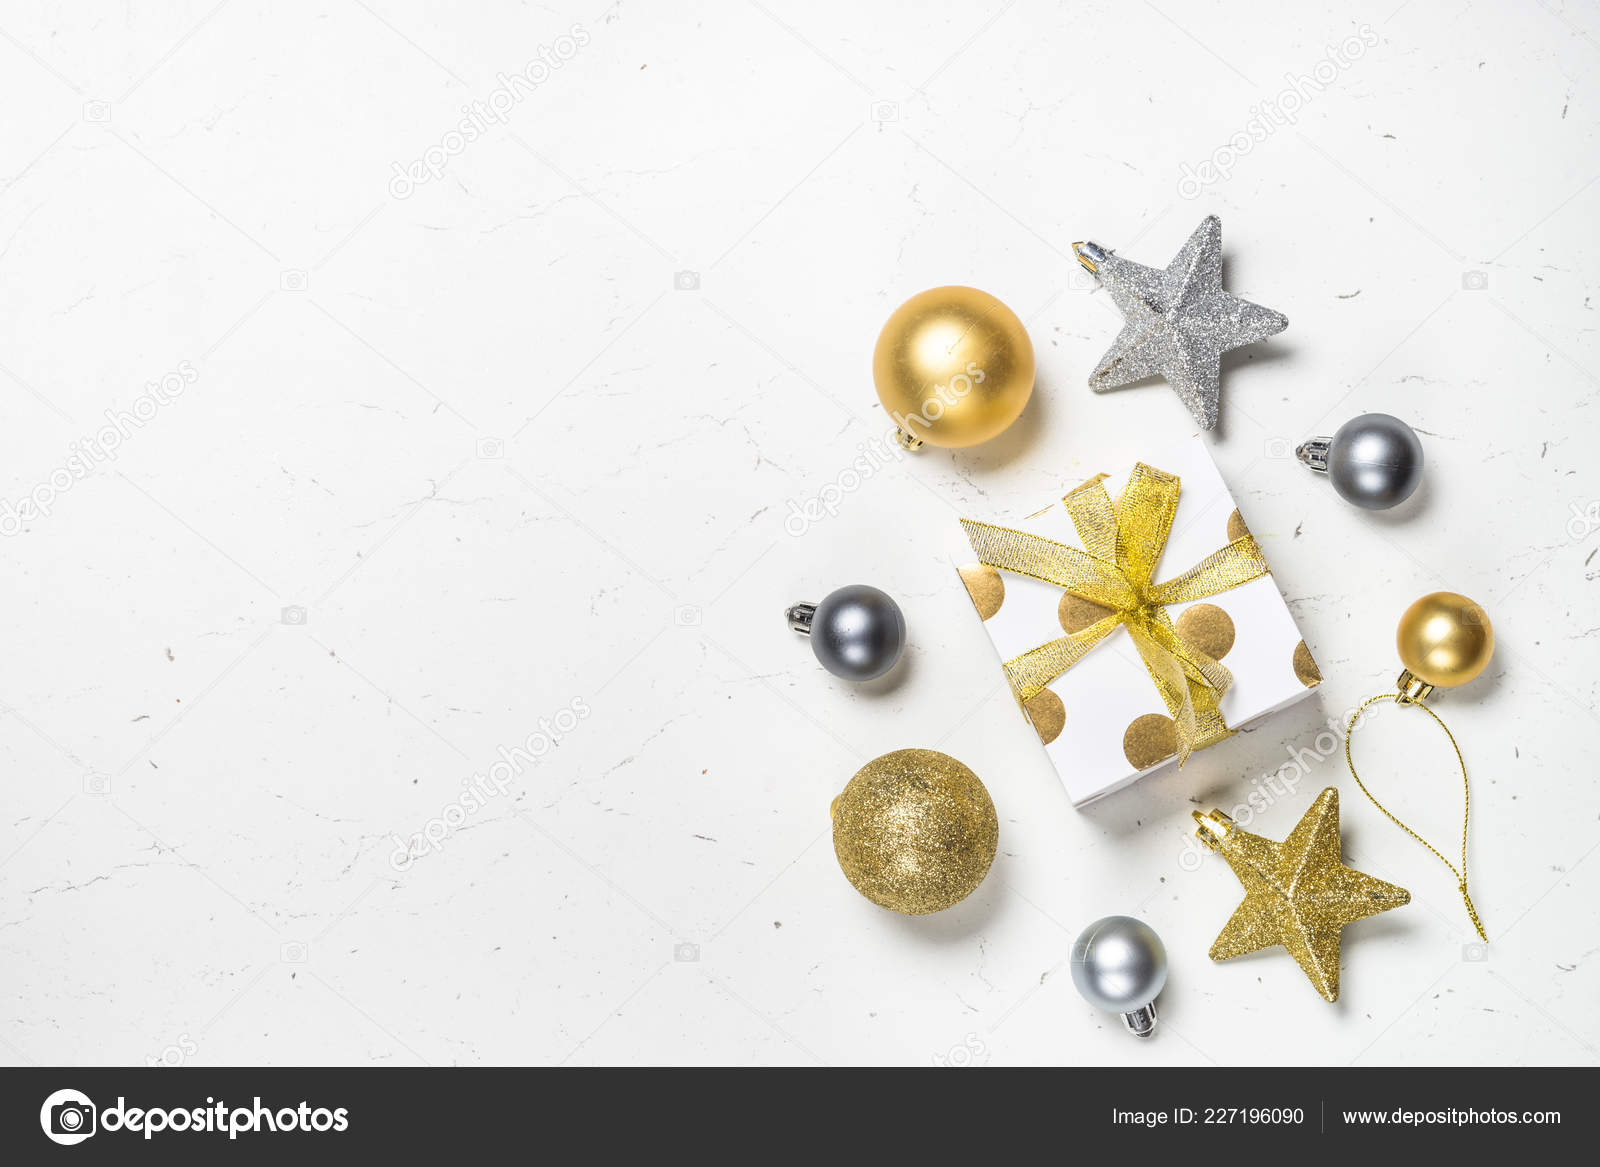 Christmas background with gold and silver decorations on black Stock Photo  by Nadianb